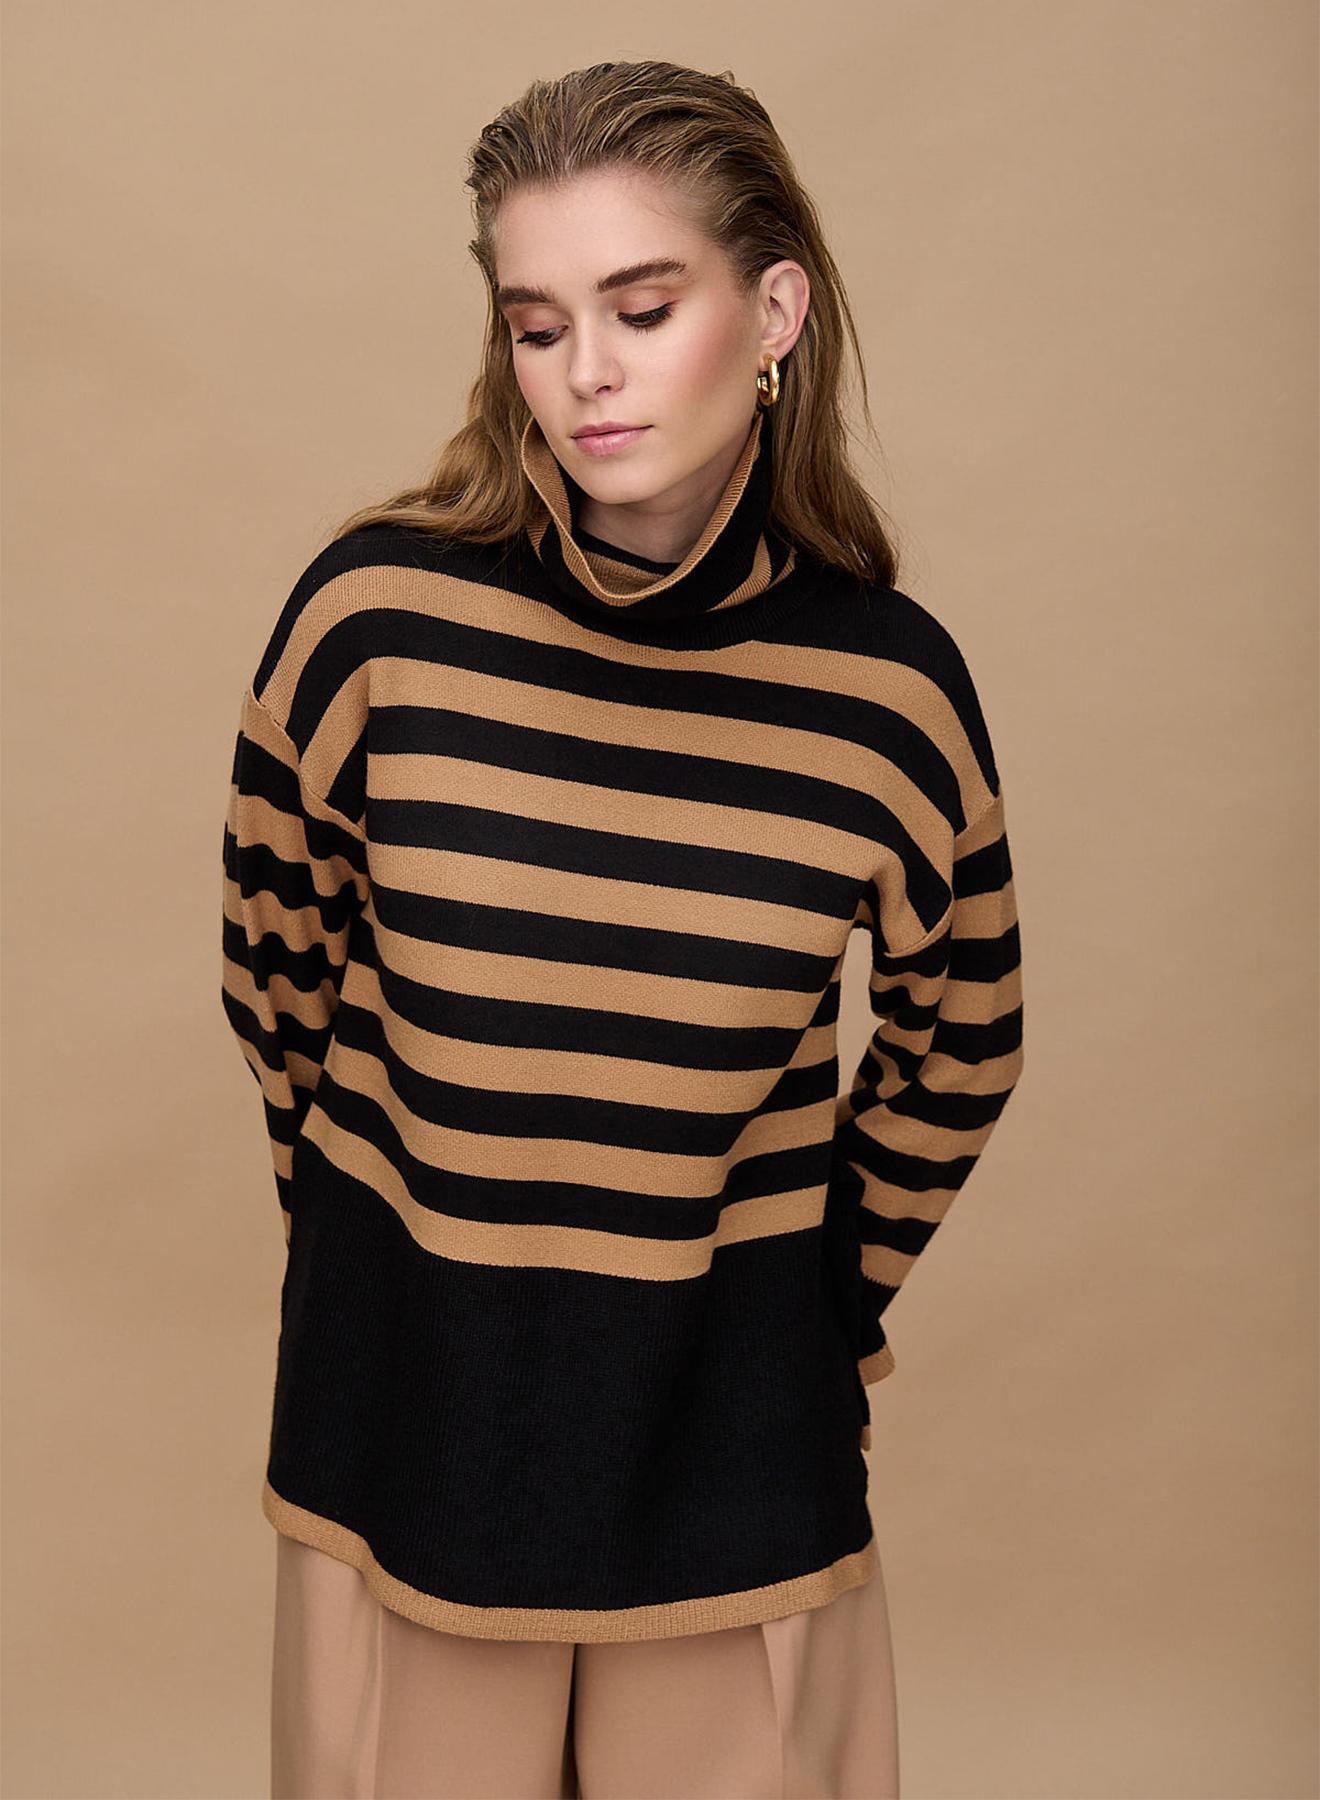 Turtleneck sweater with stripes - 4